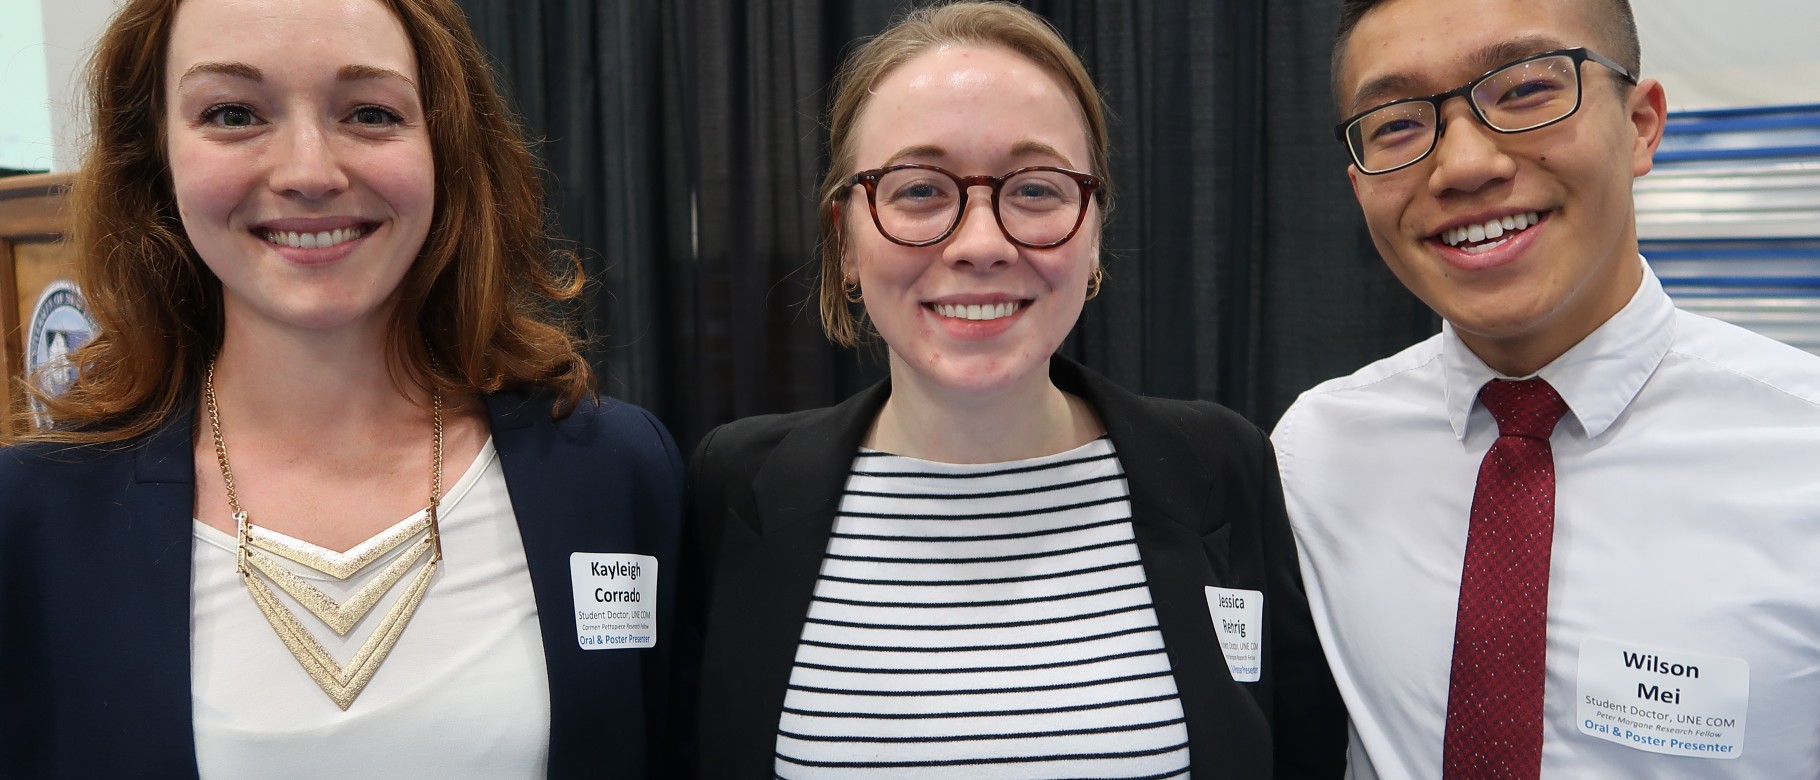 Student doctors Kaleigh Corrado, Jessica Rehrig and Wilson Mei made oral presentations at the COM forum